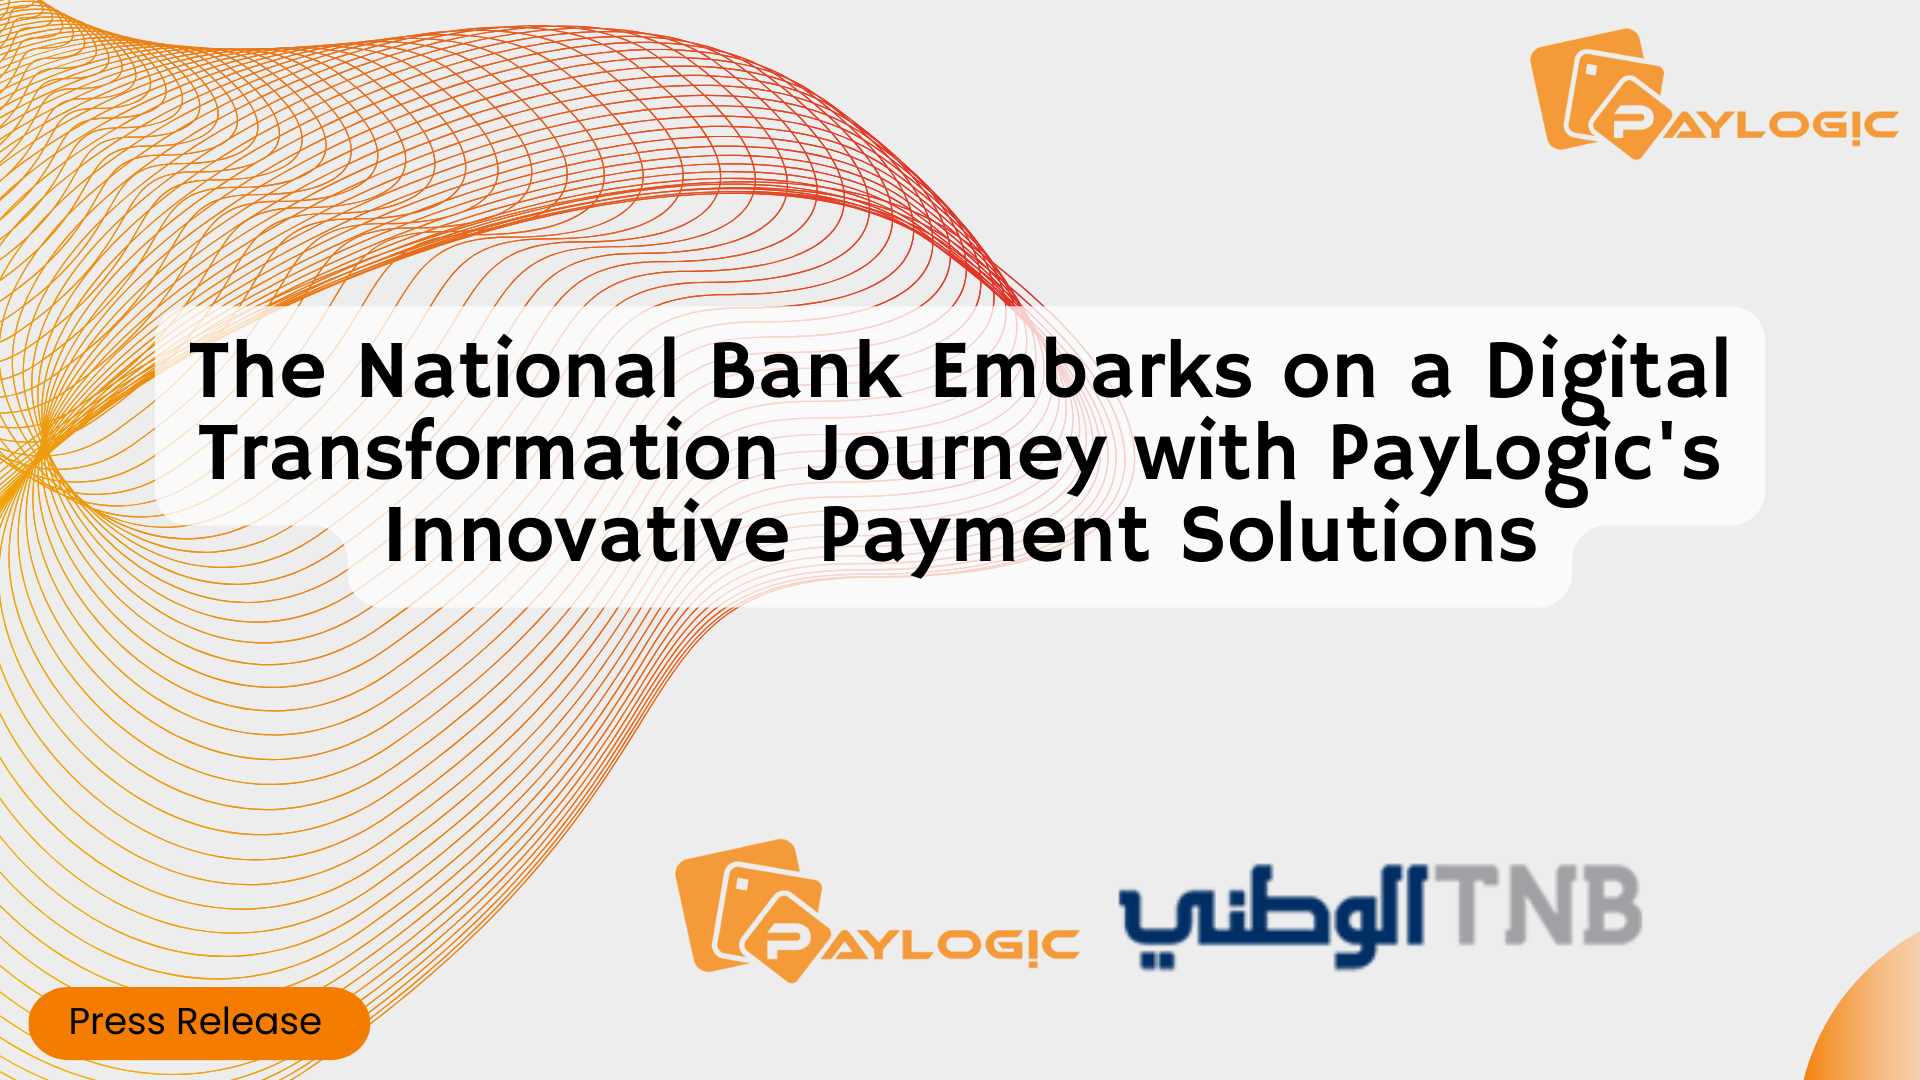 The National Bank Embarks on a Digital Transformation Journey with PayLogic’s Innovative Payment Solutions